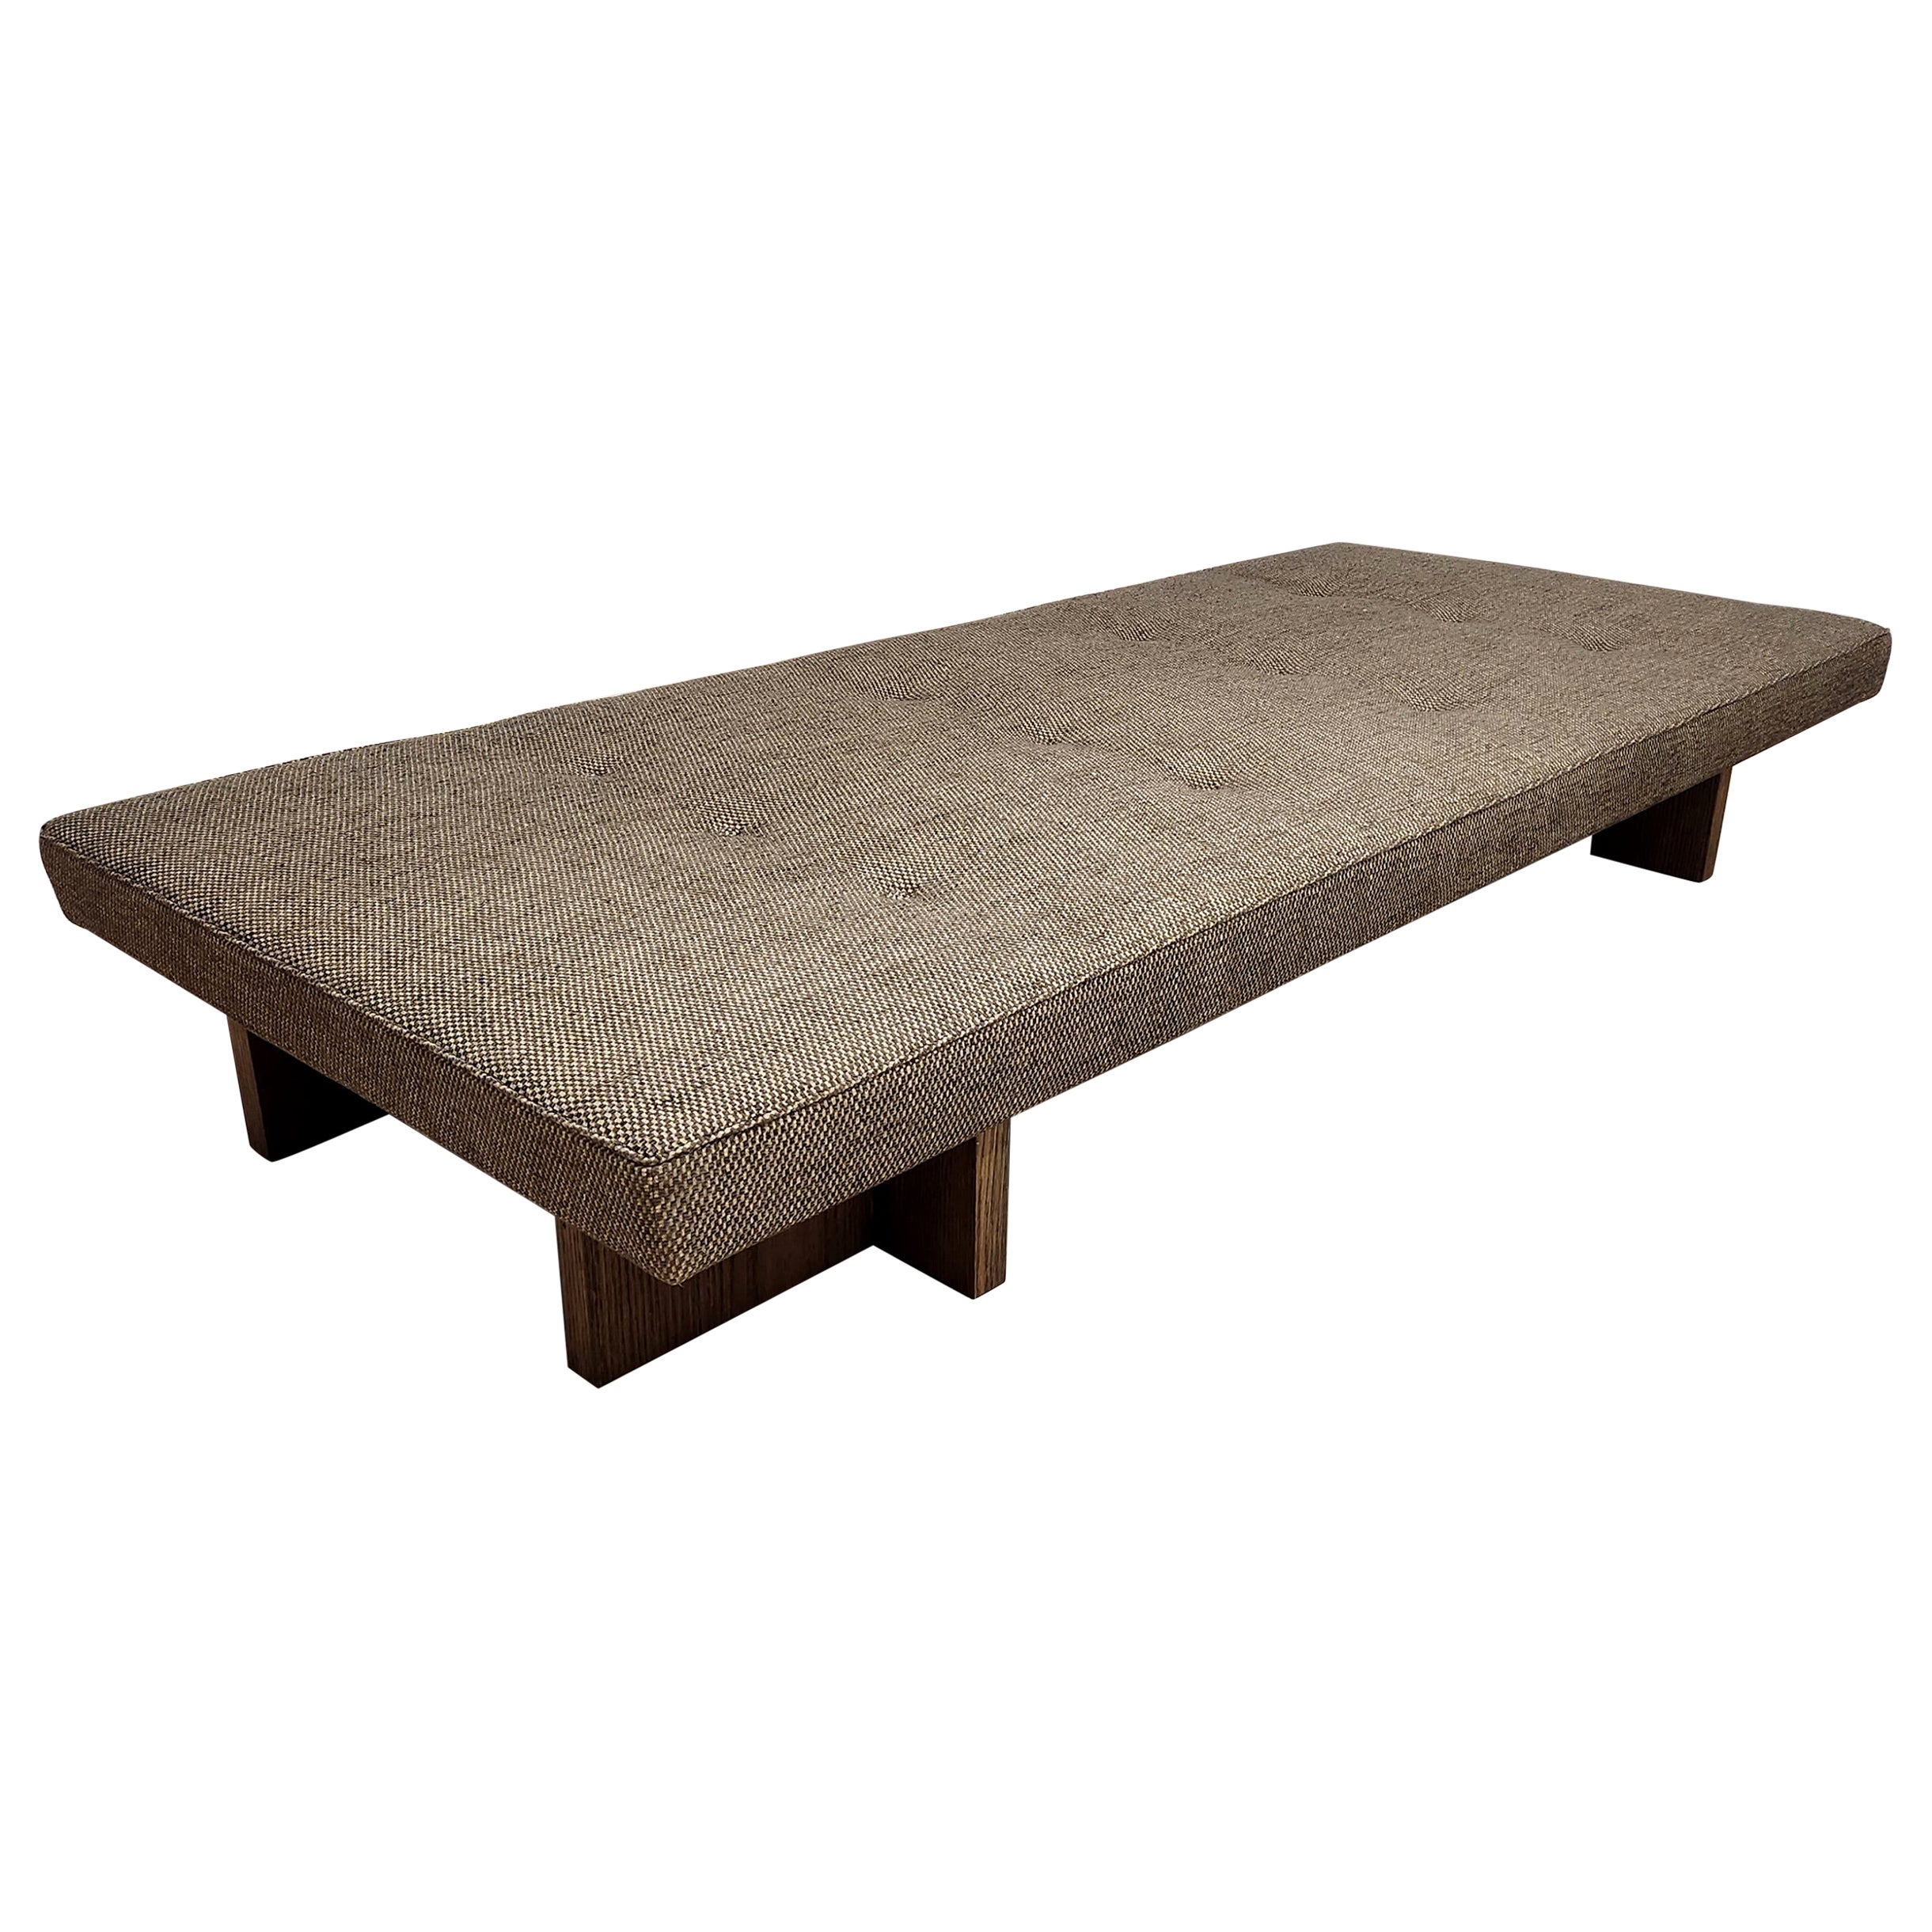 Custom Made Gueridon Day Bed with Client's Own Fabric COM, Choice of Wood Stain For Sale